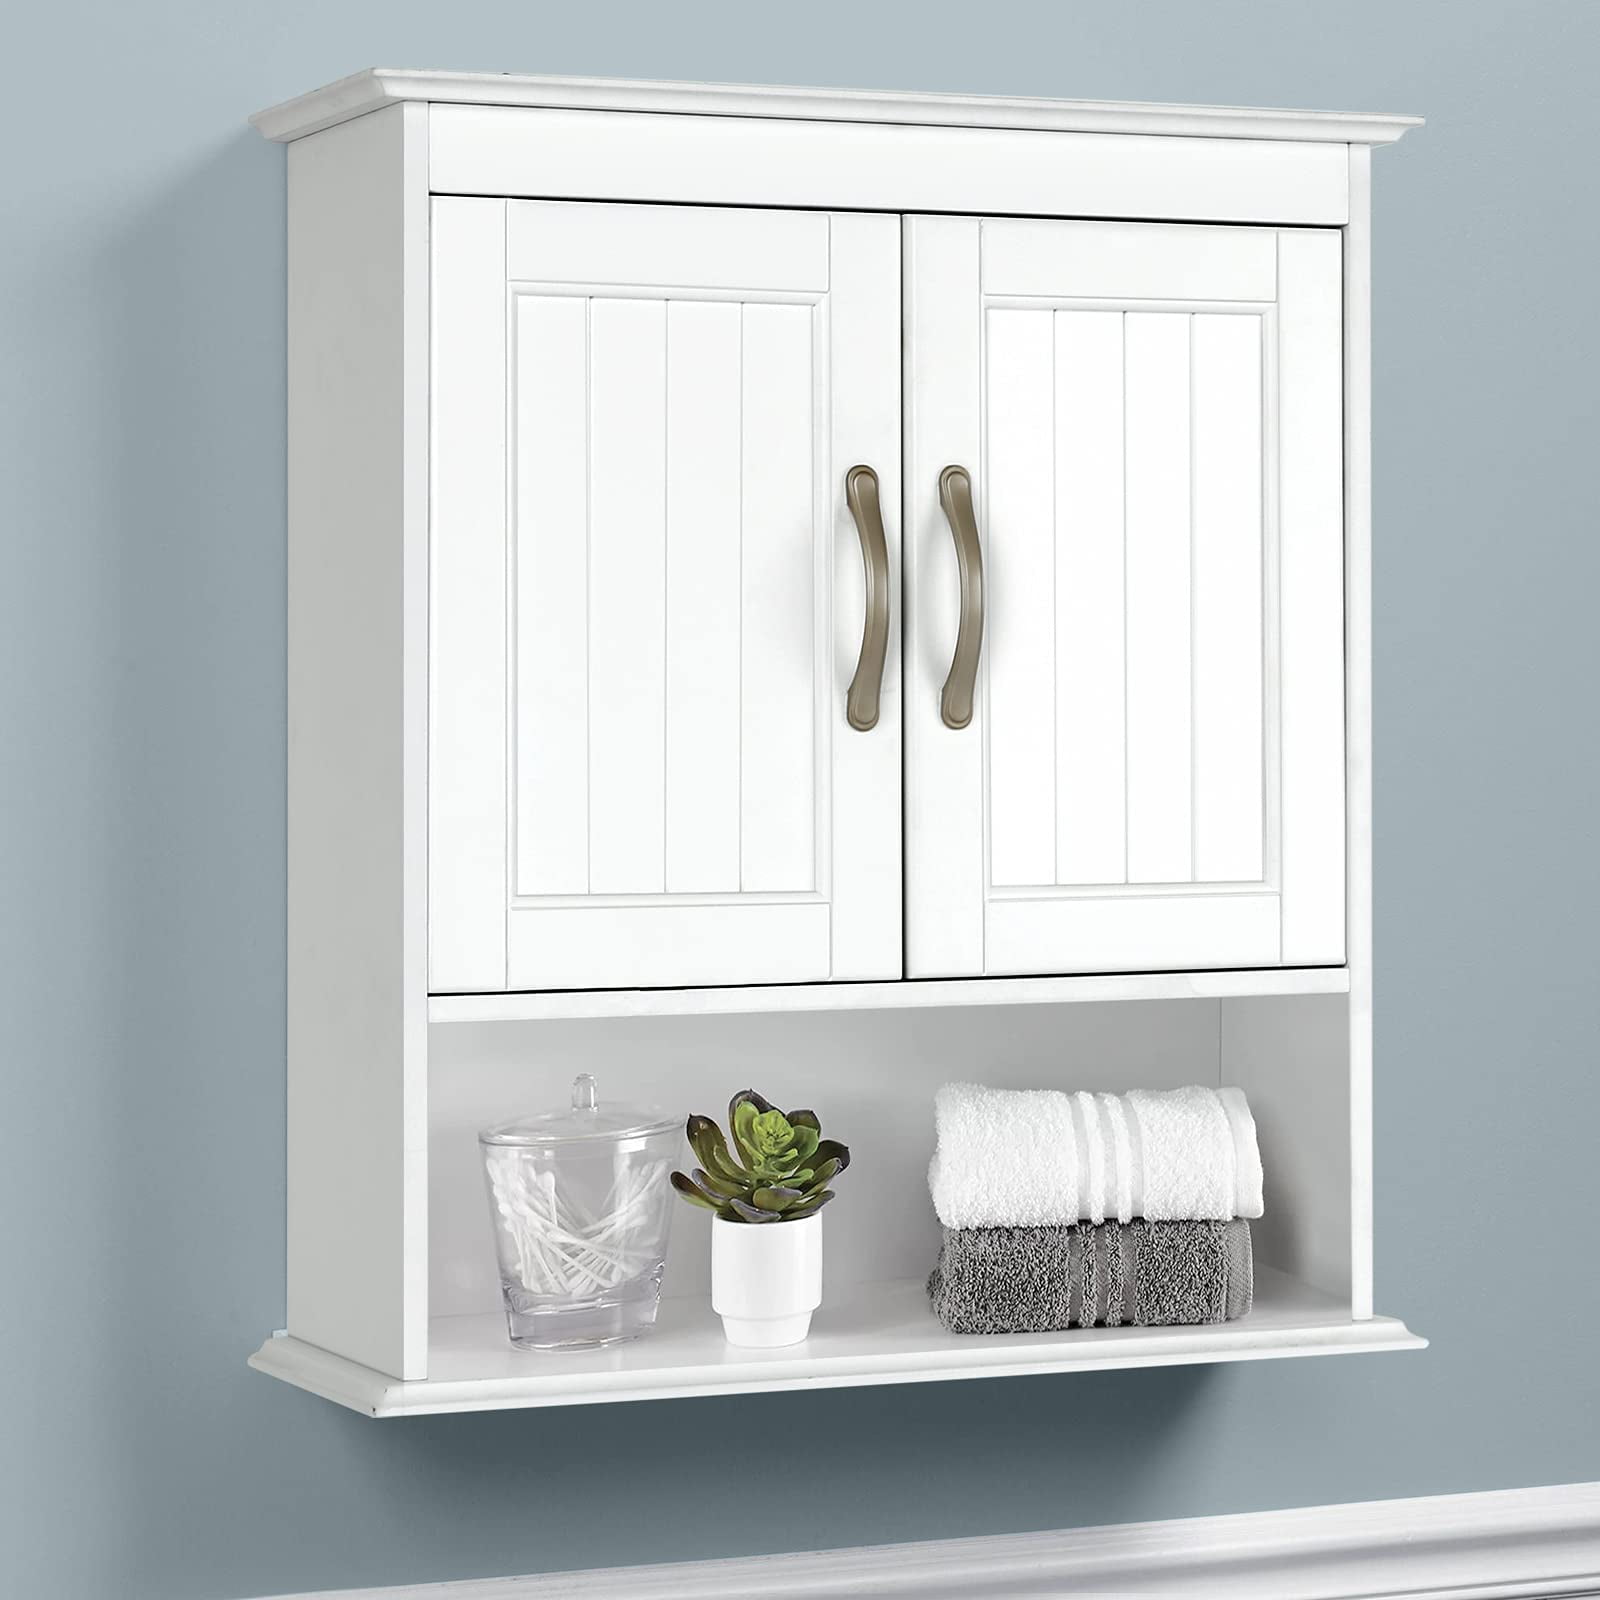 BackH Bathroom Wall Cabinet, Over The Toilet Storage Cabinet with 2 ...